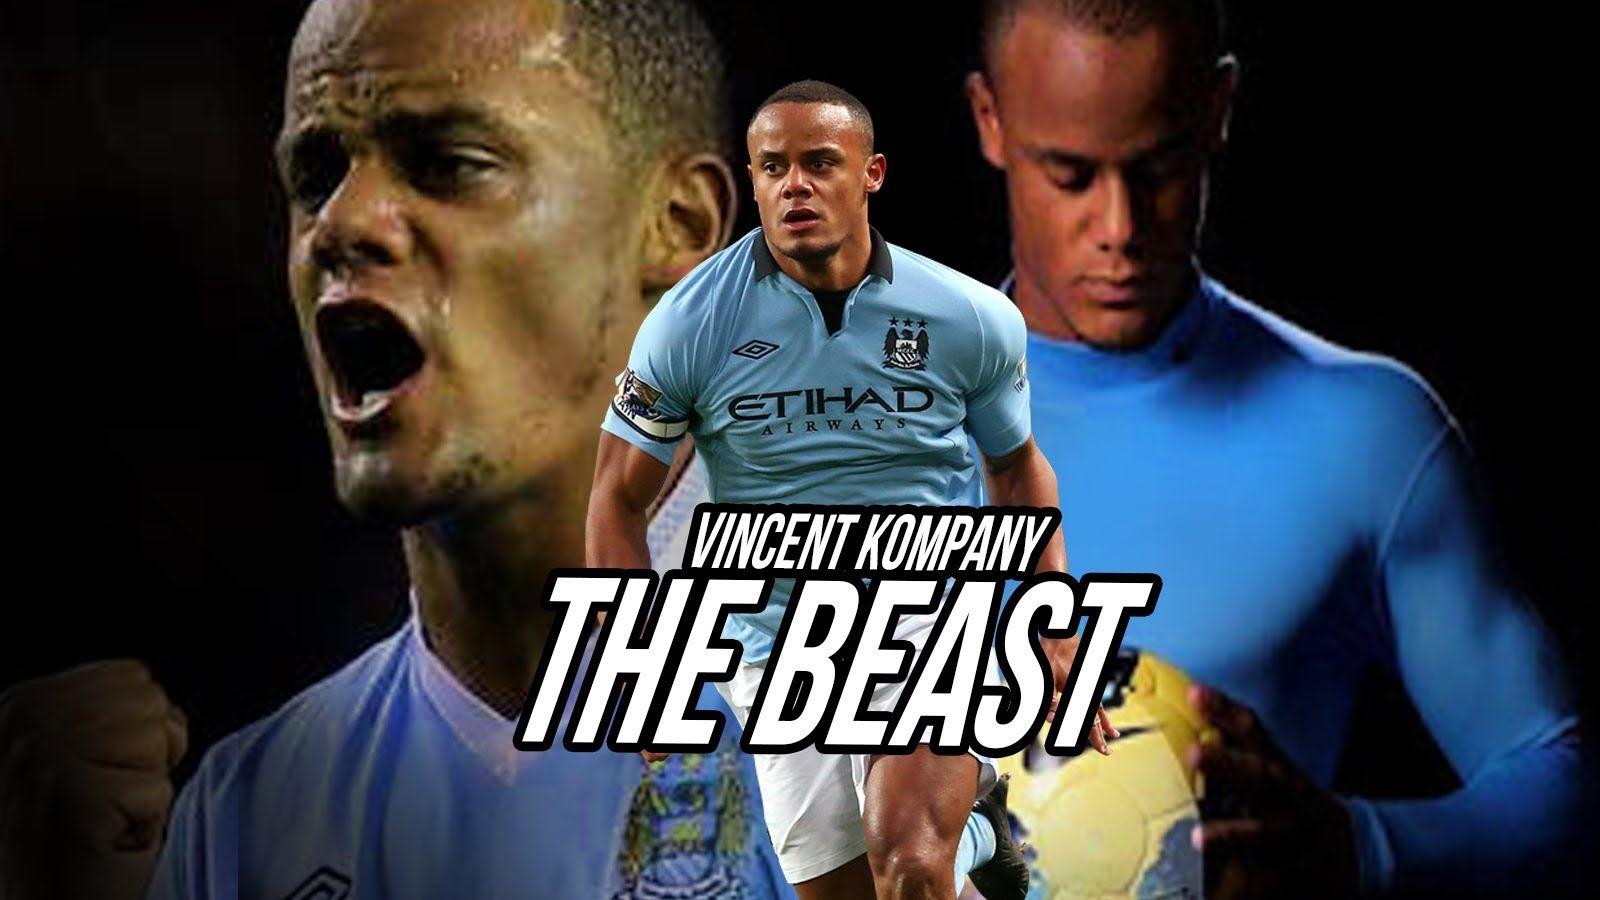 Vincent Kompany ○ The Best Defender in the World ○ Manchester